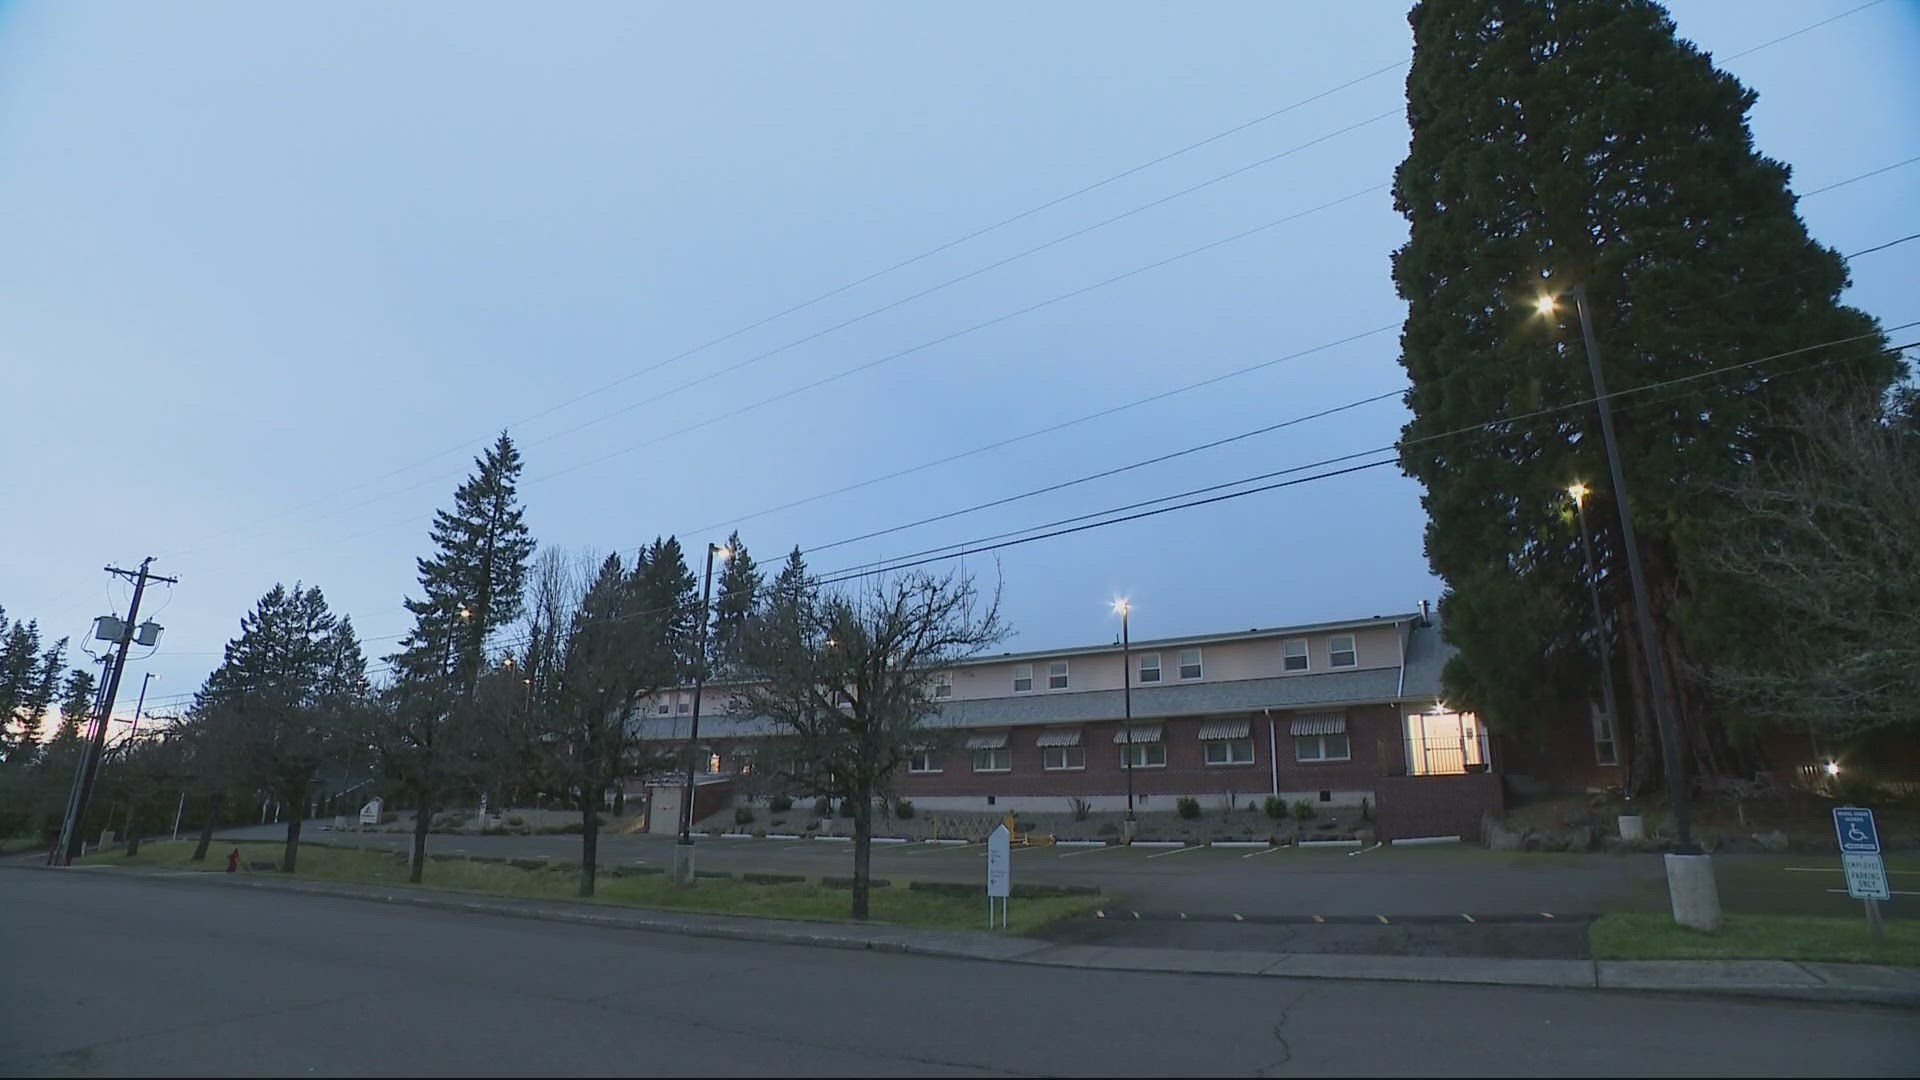 Mount Hood Senior Living has lost its license to operate after several concerning incidents and violations, according to the  Oregon Department of Human Services.